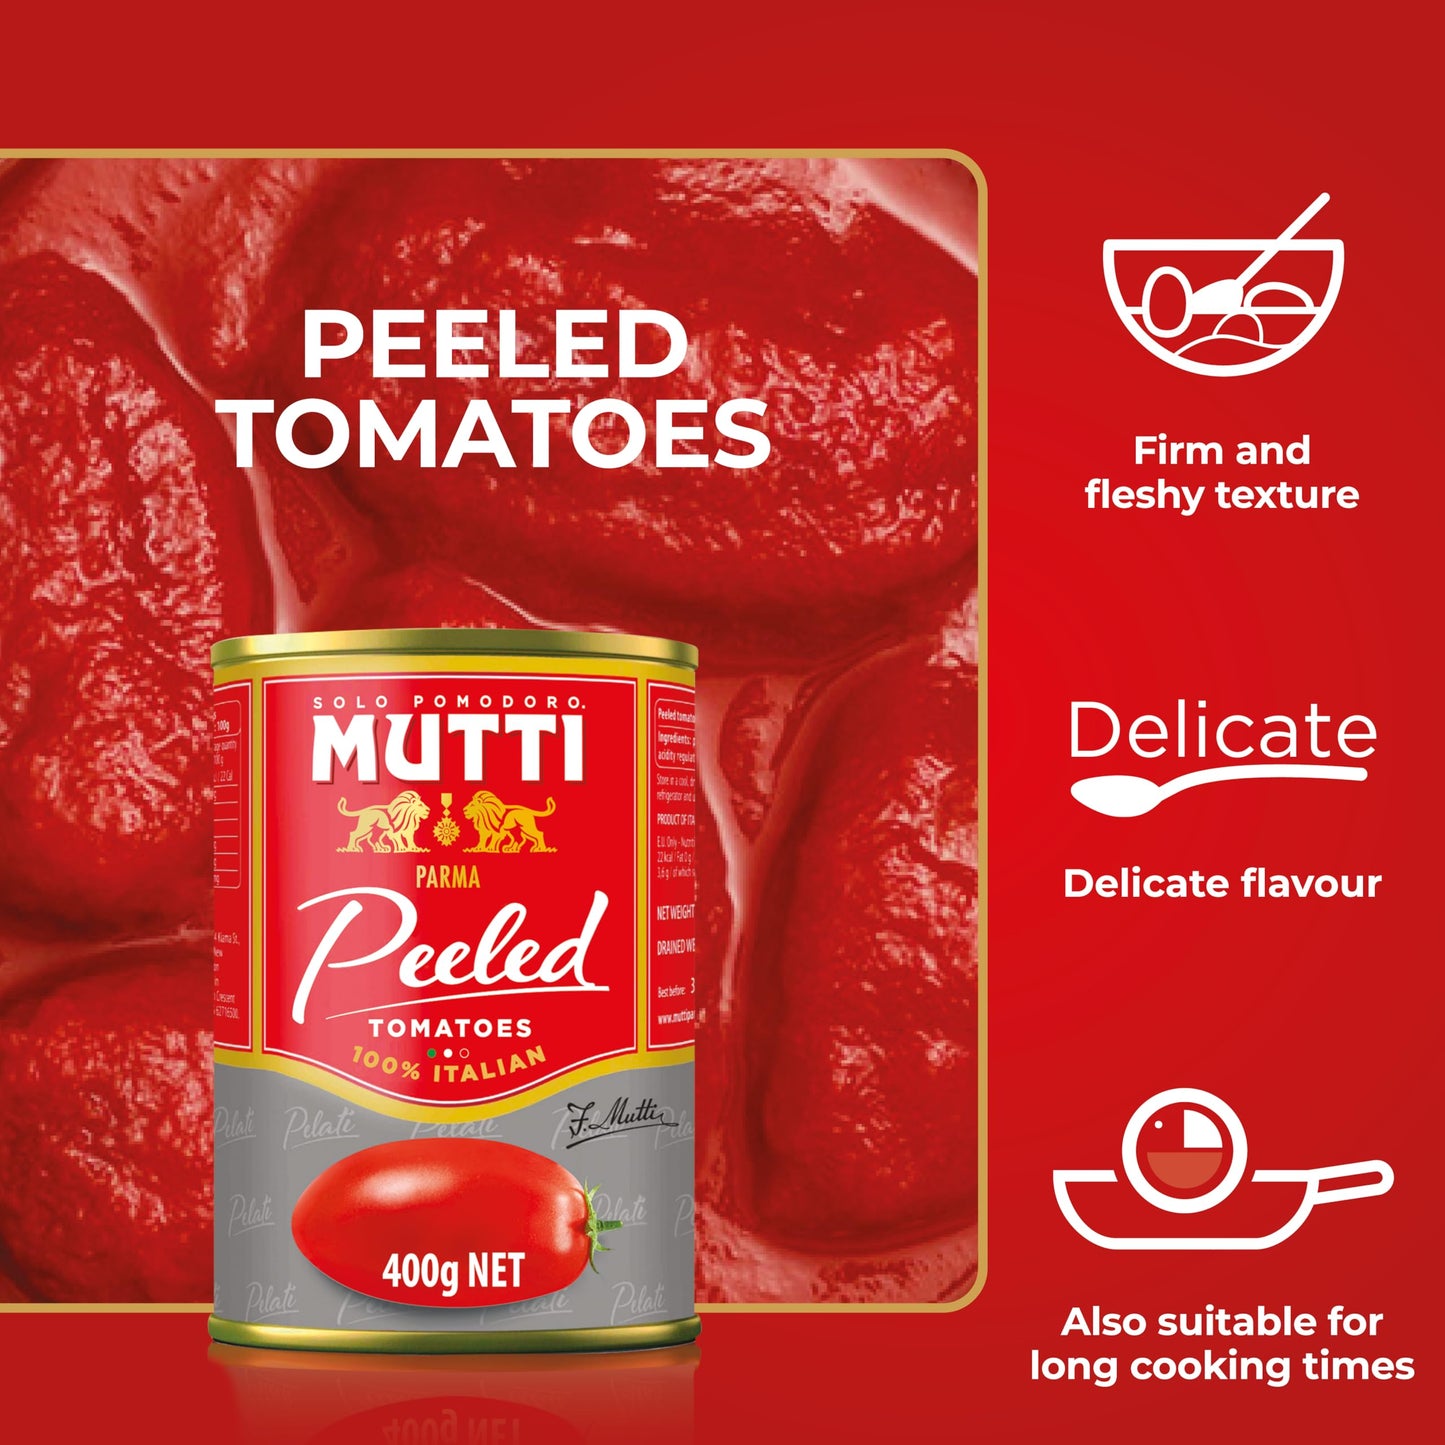 Mutti Whole Peeled Tomatoes (Pelati), 14 oz. | 12 Pack | Italy’s #1 Brand of Tomatoes | Fresh Taste for Cooking | Canned Tomatoes | Vegan Friendly & Gluten Free | No Additives or Preservatives